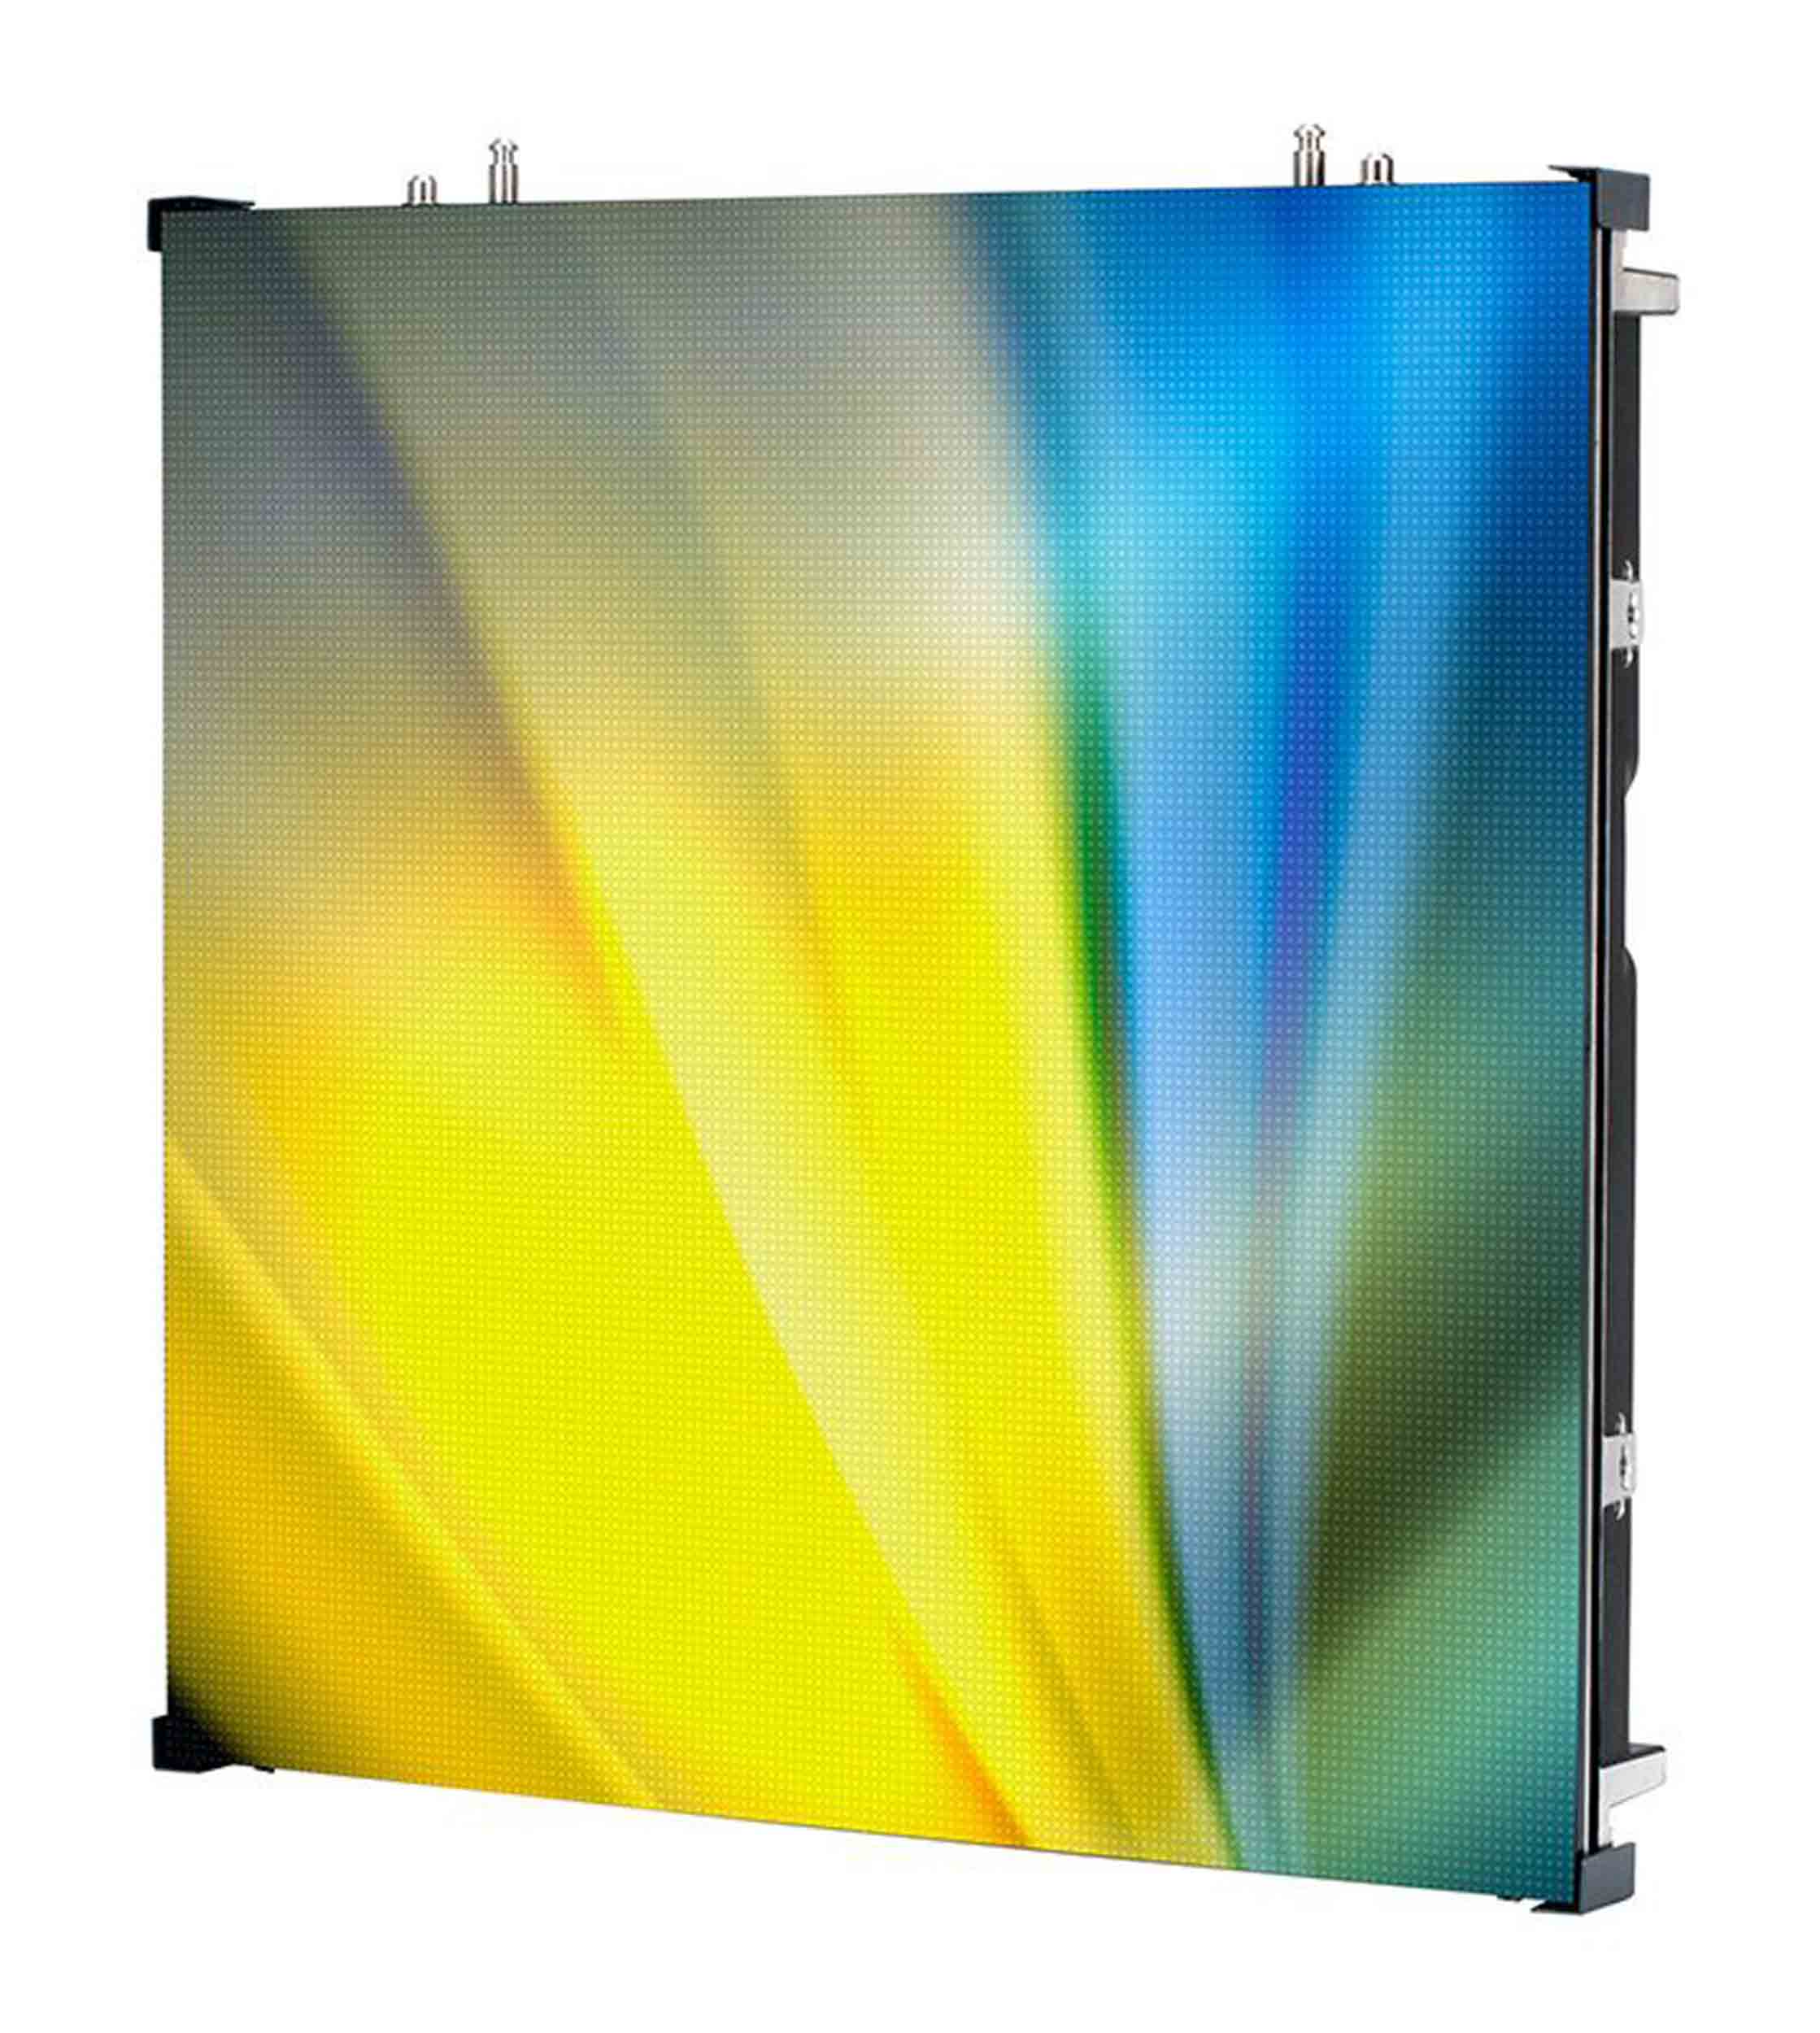 ADJ VS3IP, LED High Resolution Video Panel with IP65 Front and IP54 Rear by ADJ